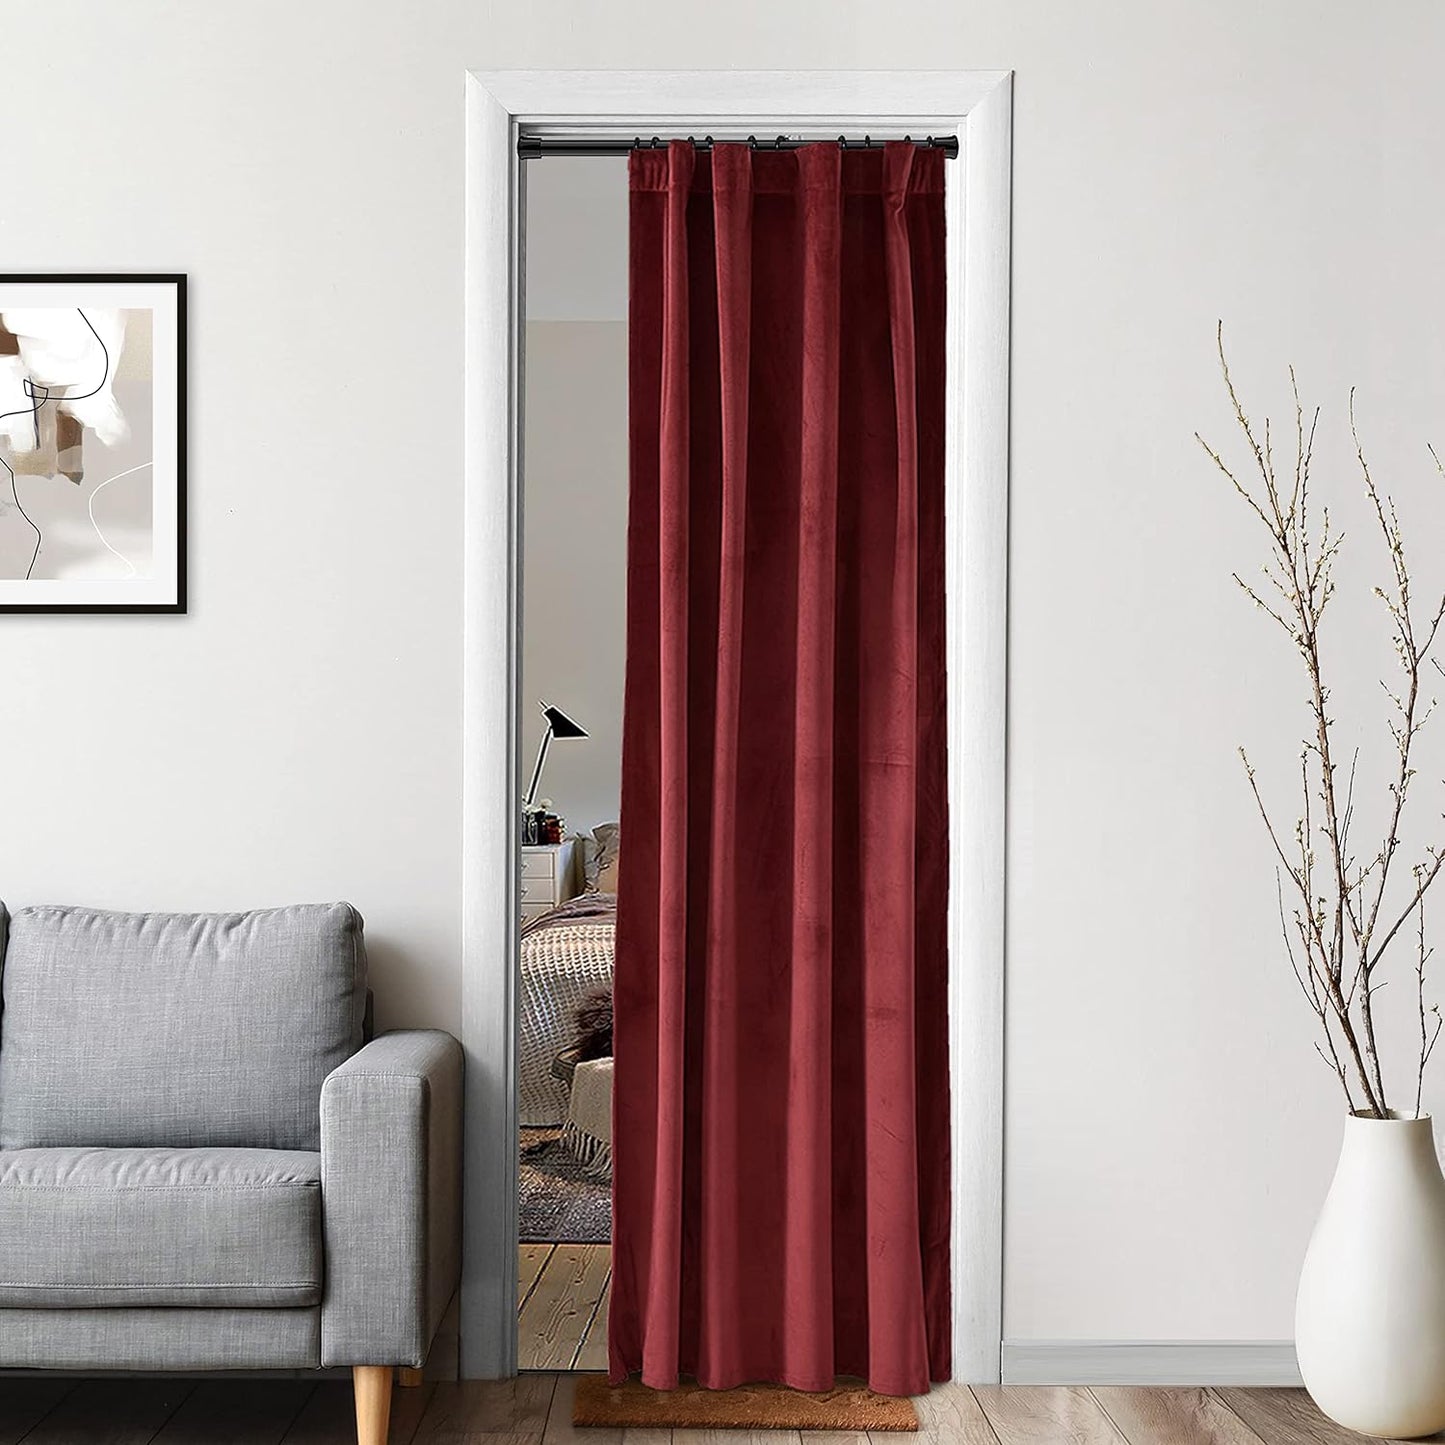 XTMYI Velvet Blackout Door Curtain Panels for Bedroom,Thermal Insulated Winter Warm Back Tab Rod Pocket Black Out Cover Doorway Curtains Privacy/Window Drapes,80 Inch Length  XTMYI TEXTILE Burgundy 38X80 